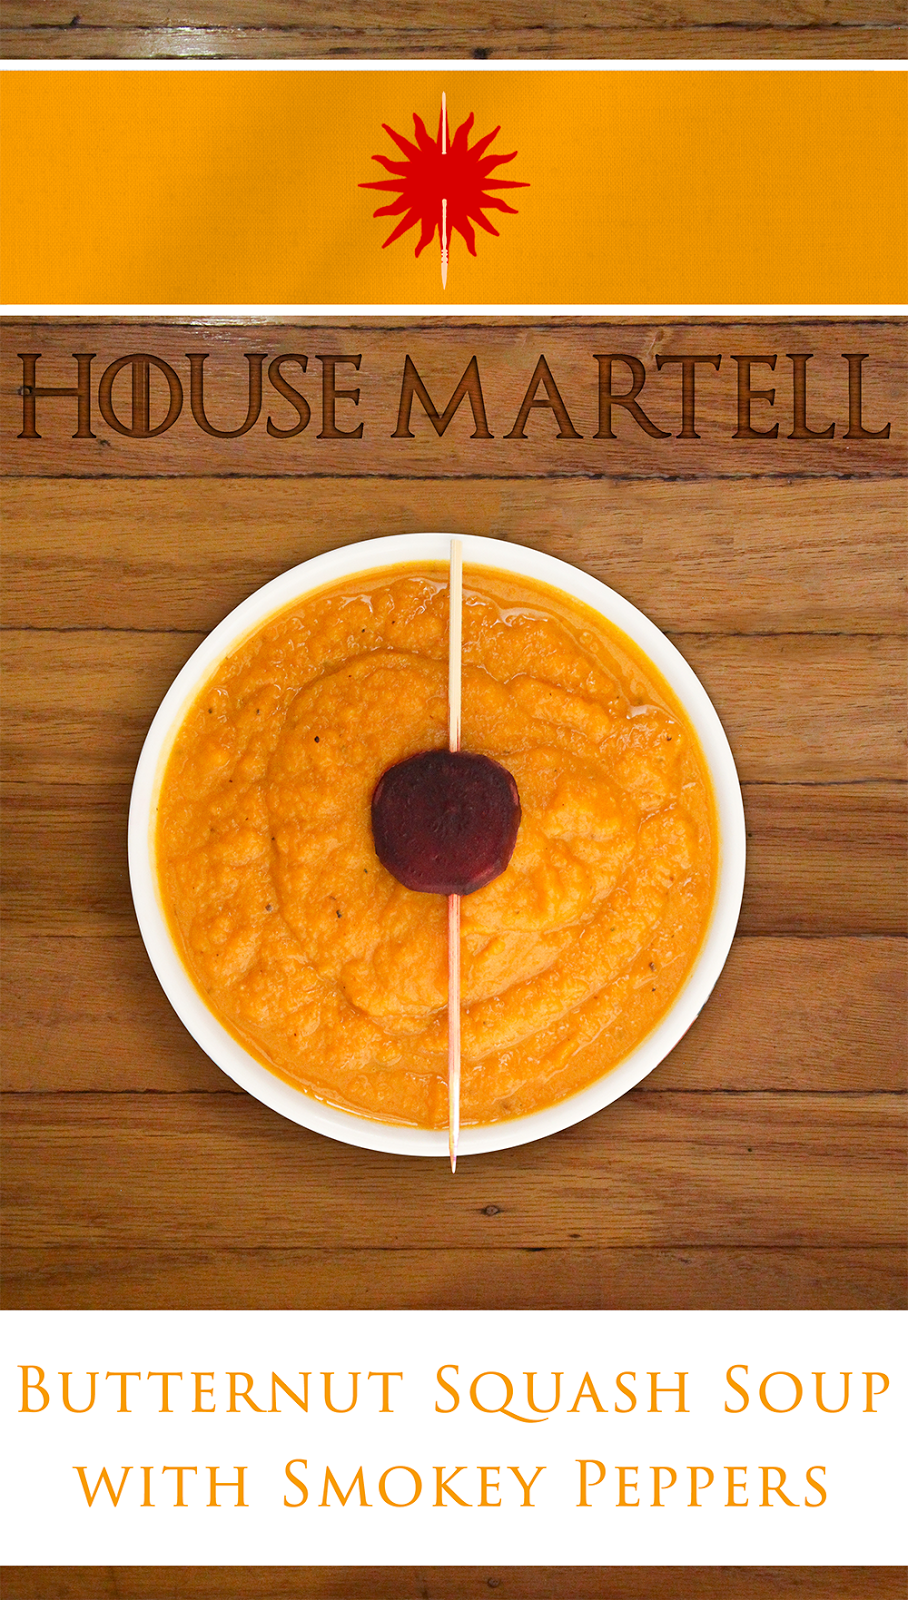 Roasted butternut squash and chipotle pepper soup. Serve with a beet skewer to create the House Martell Sigil. Excellent appetizer for a Game of Thrones Party.